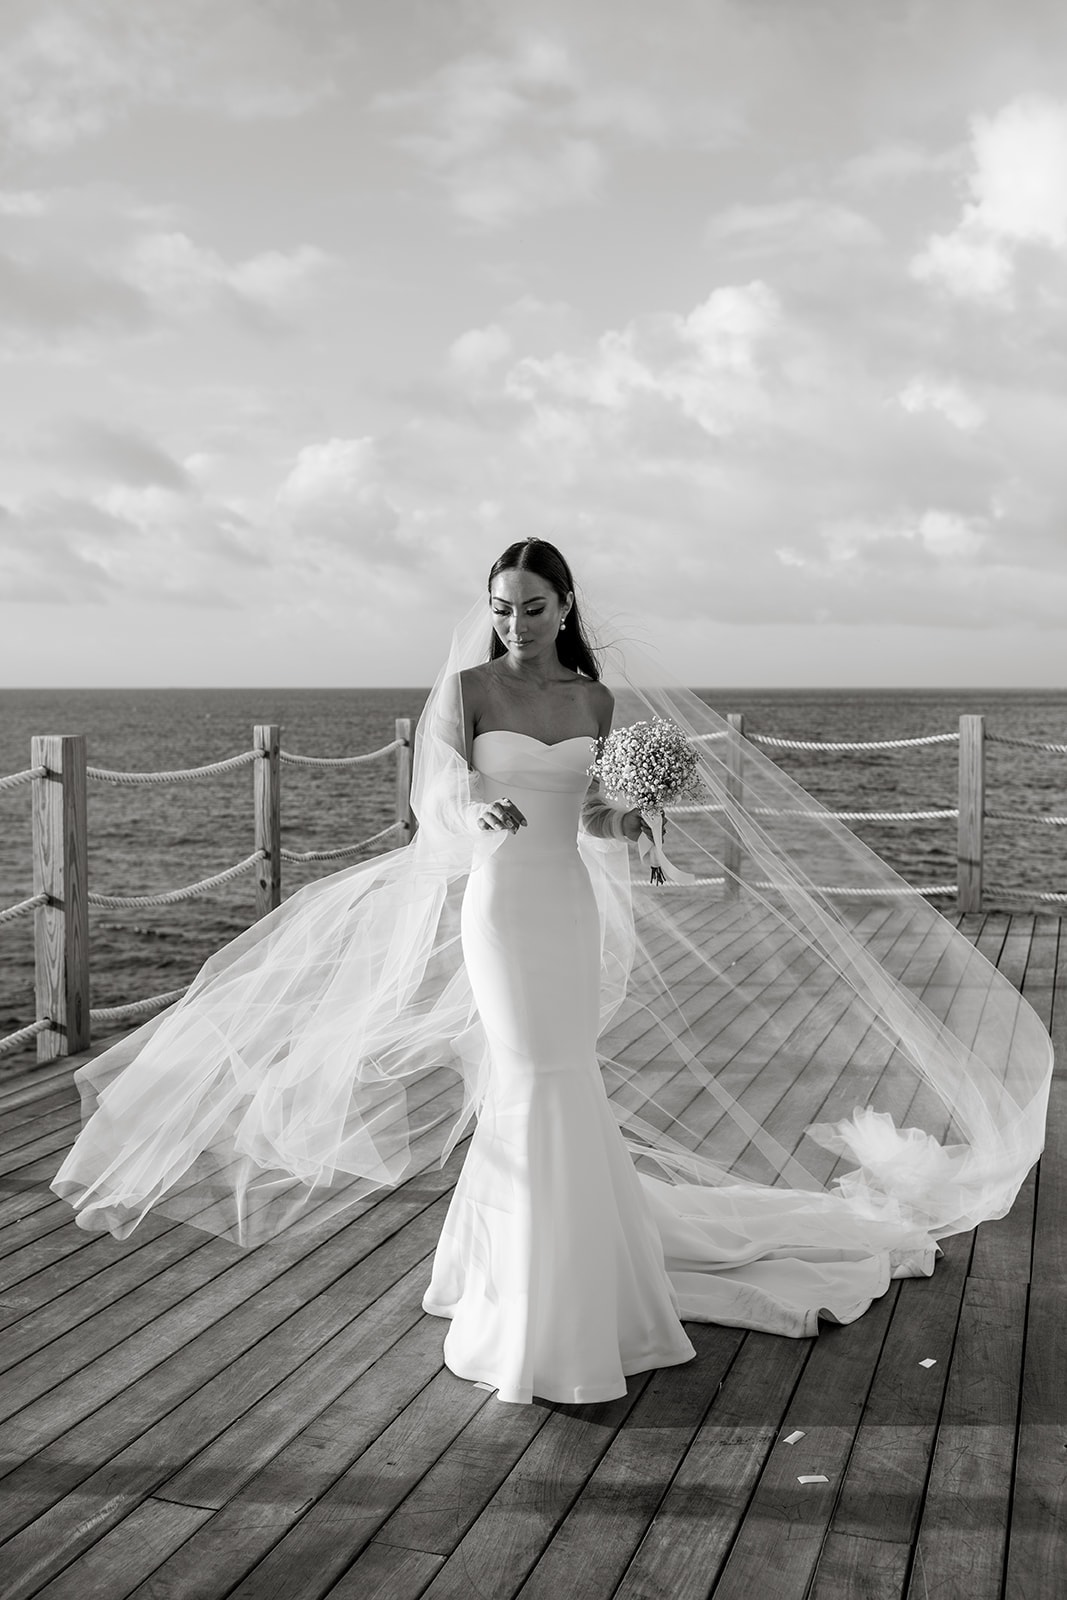 Bride in Anguilla stands for bridal portraits while veil blows in the wind